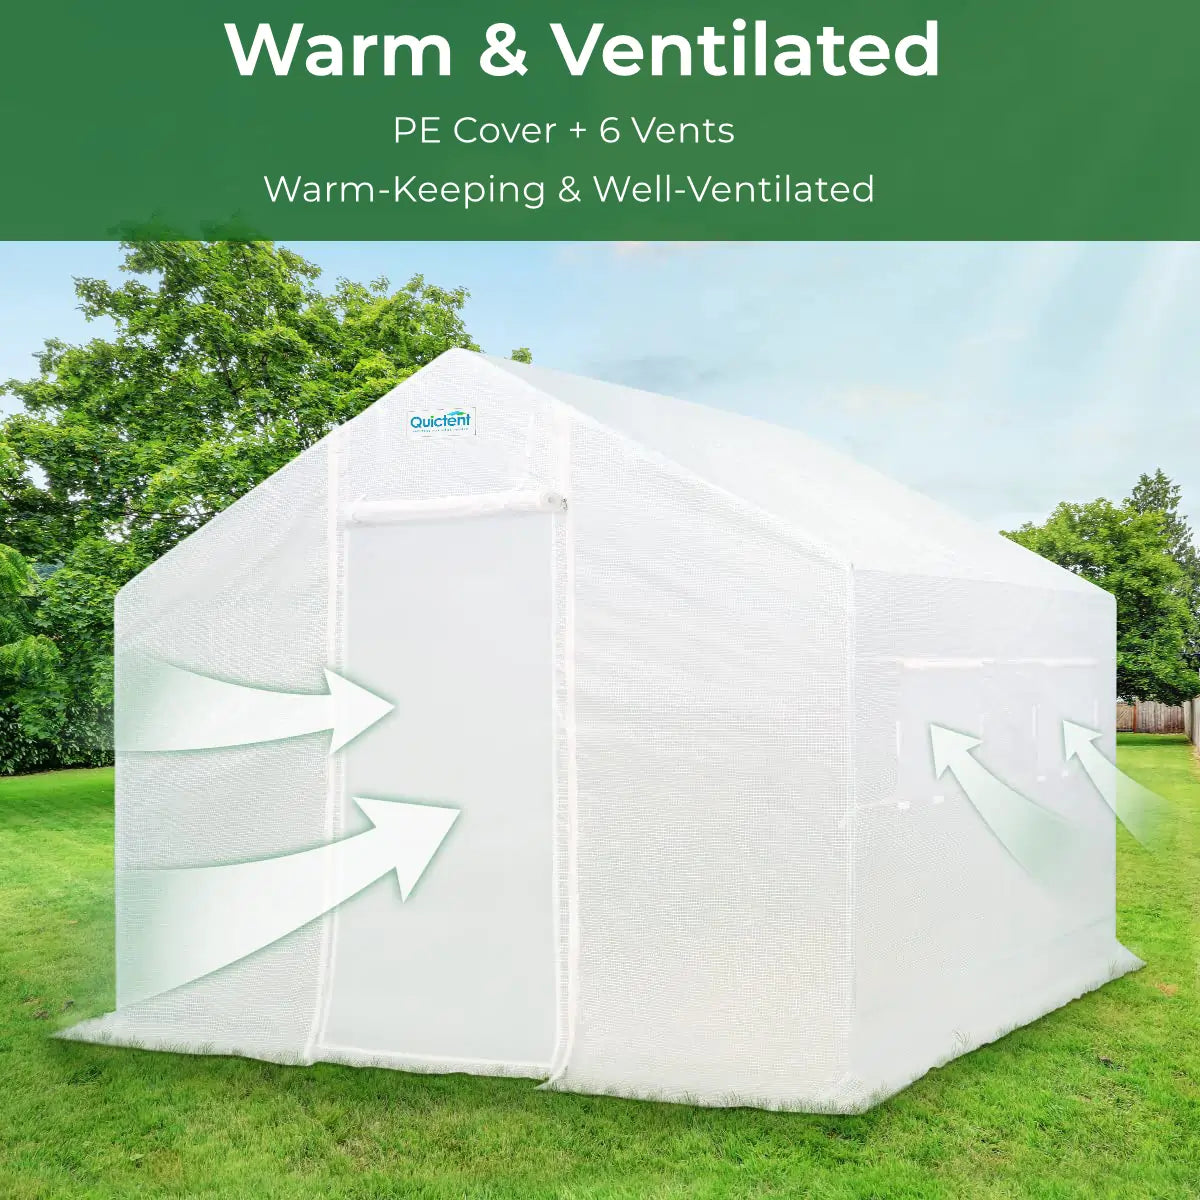 Warm-Keeping and Well-Ventilated